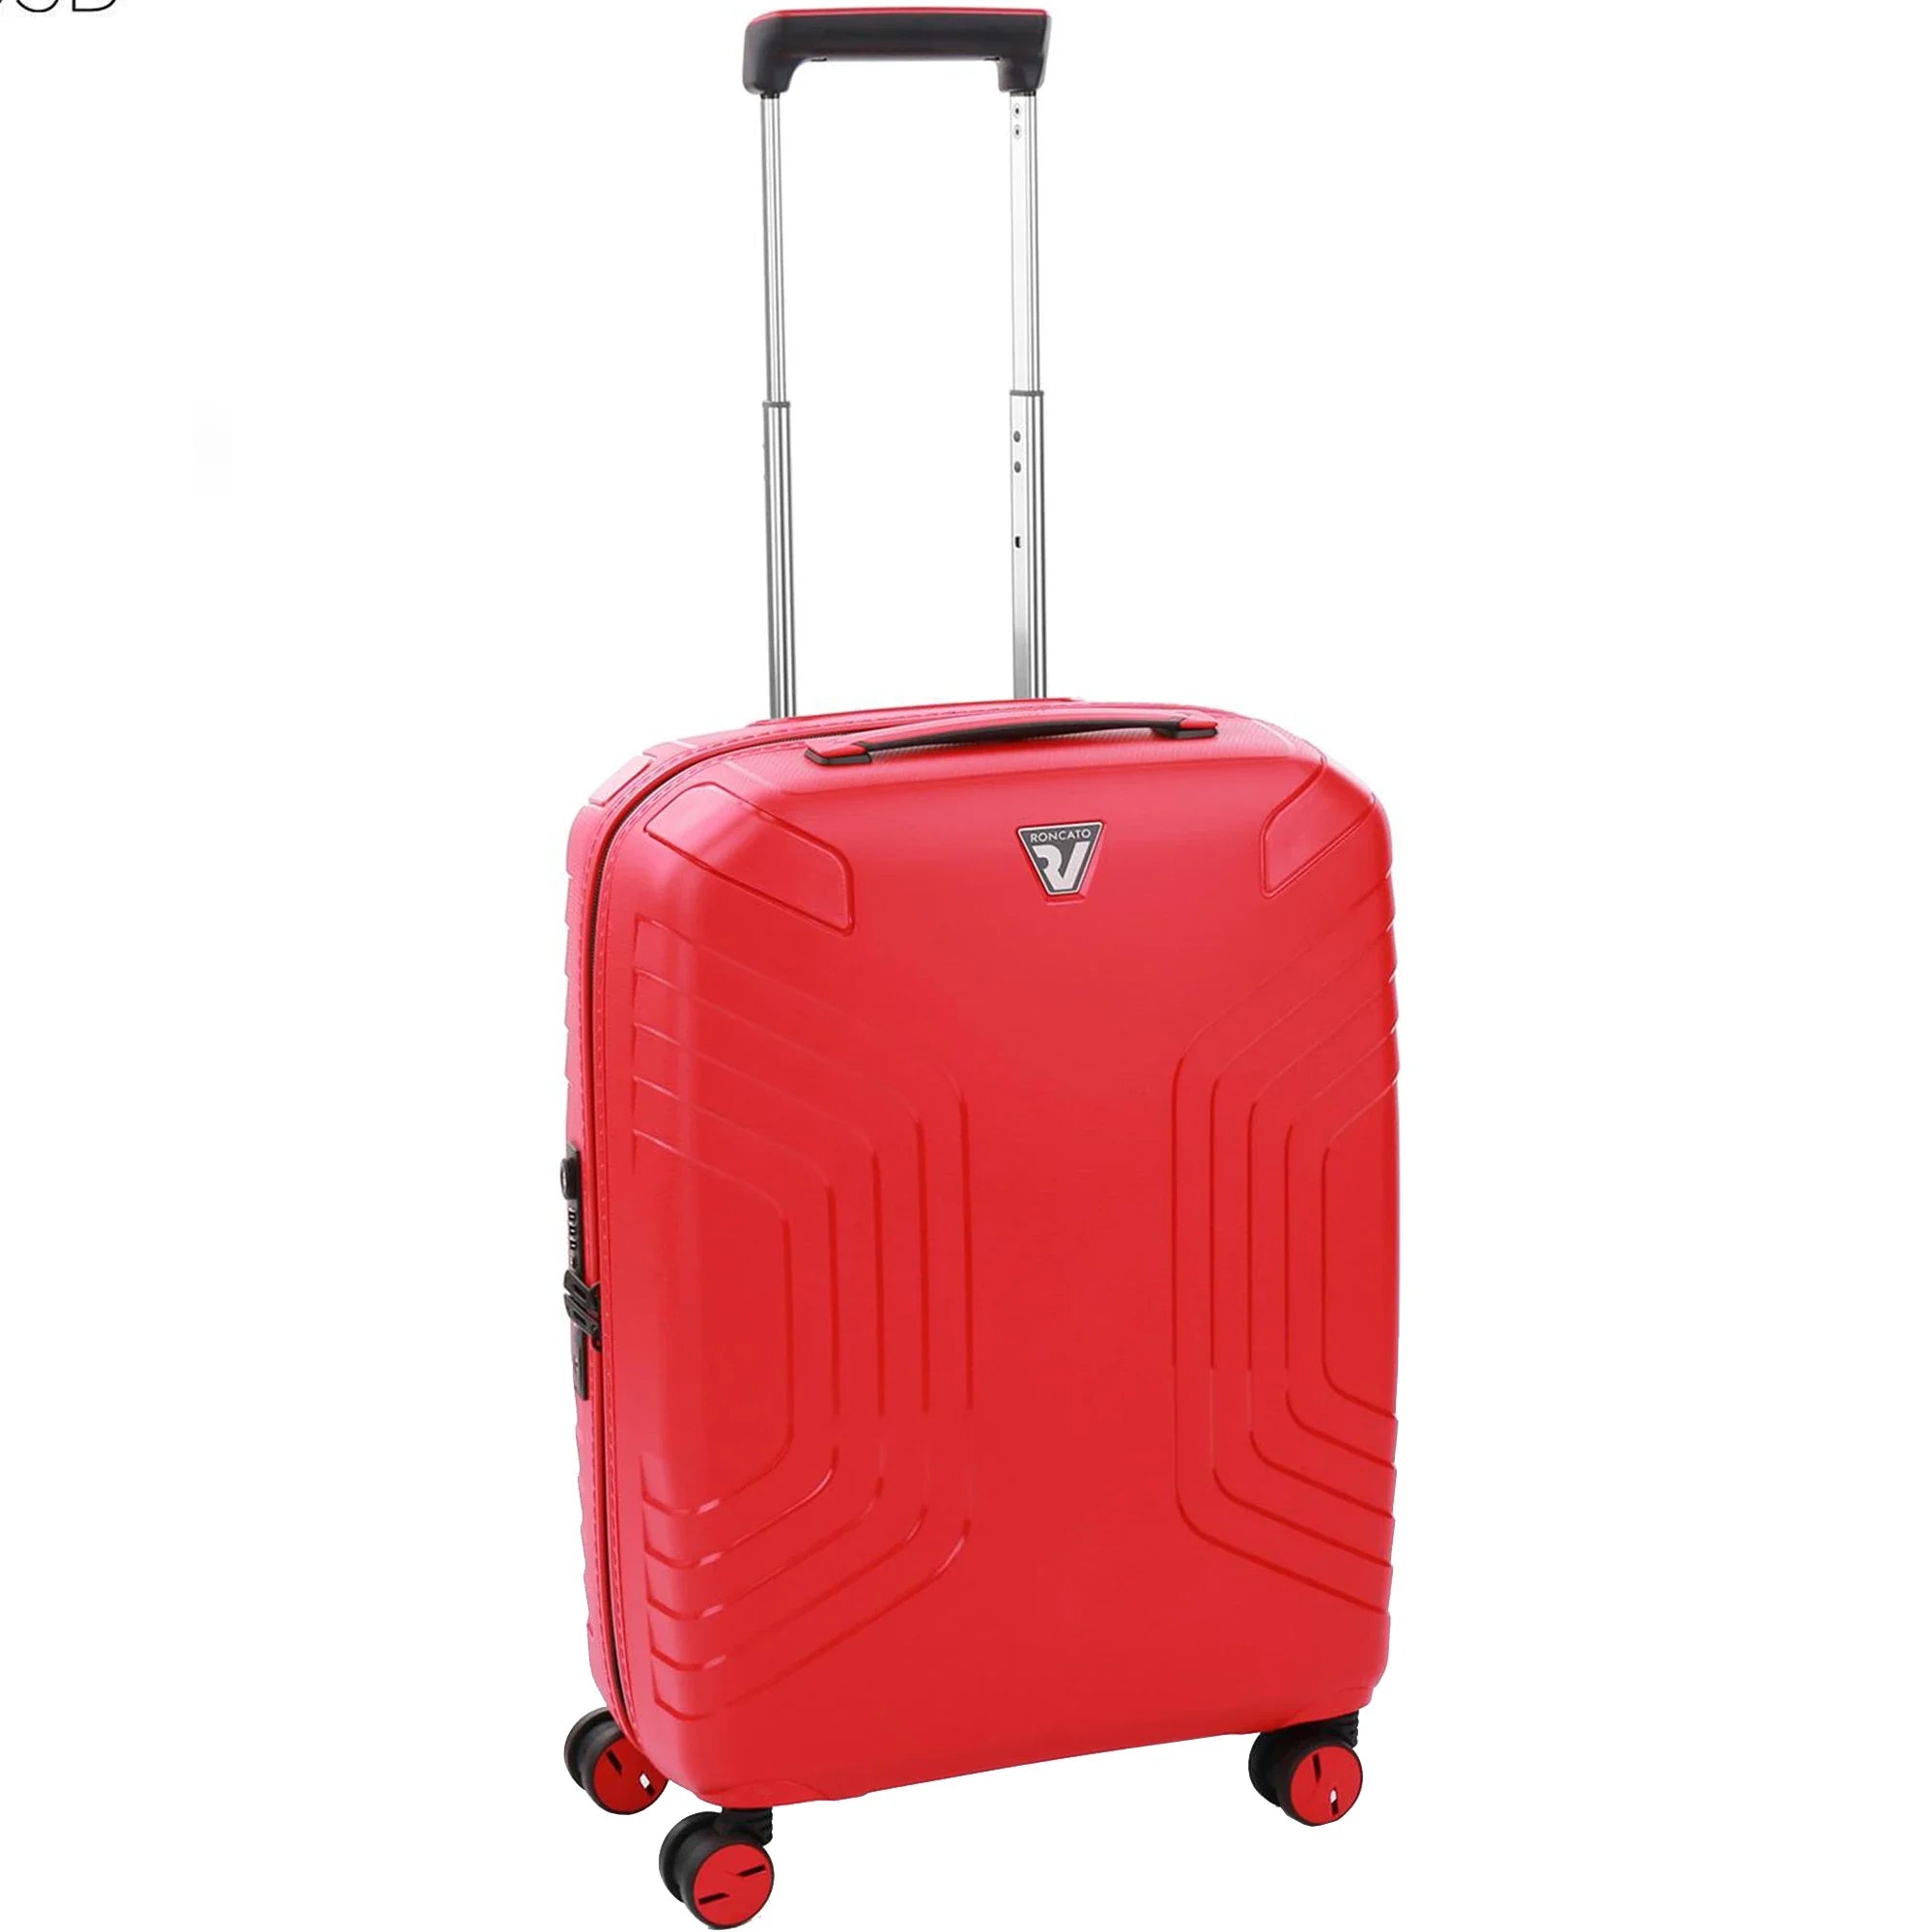 R Roncato Flight Medium Size Trolley Black - Buy At Outlet Prices!